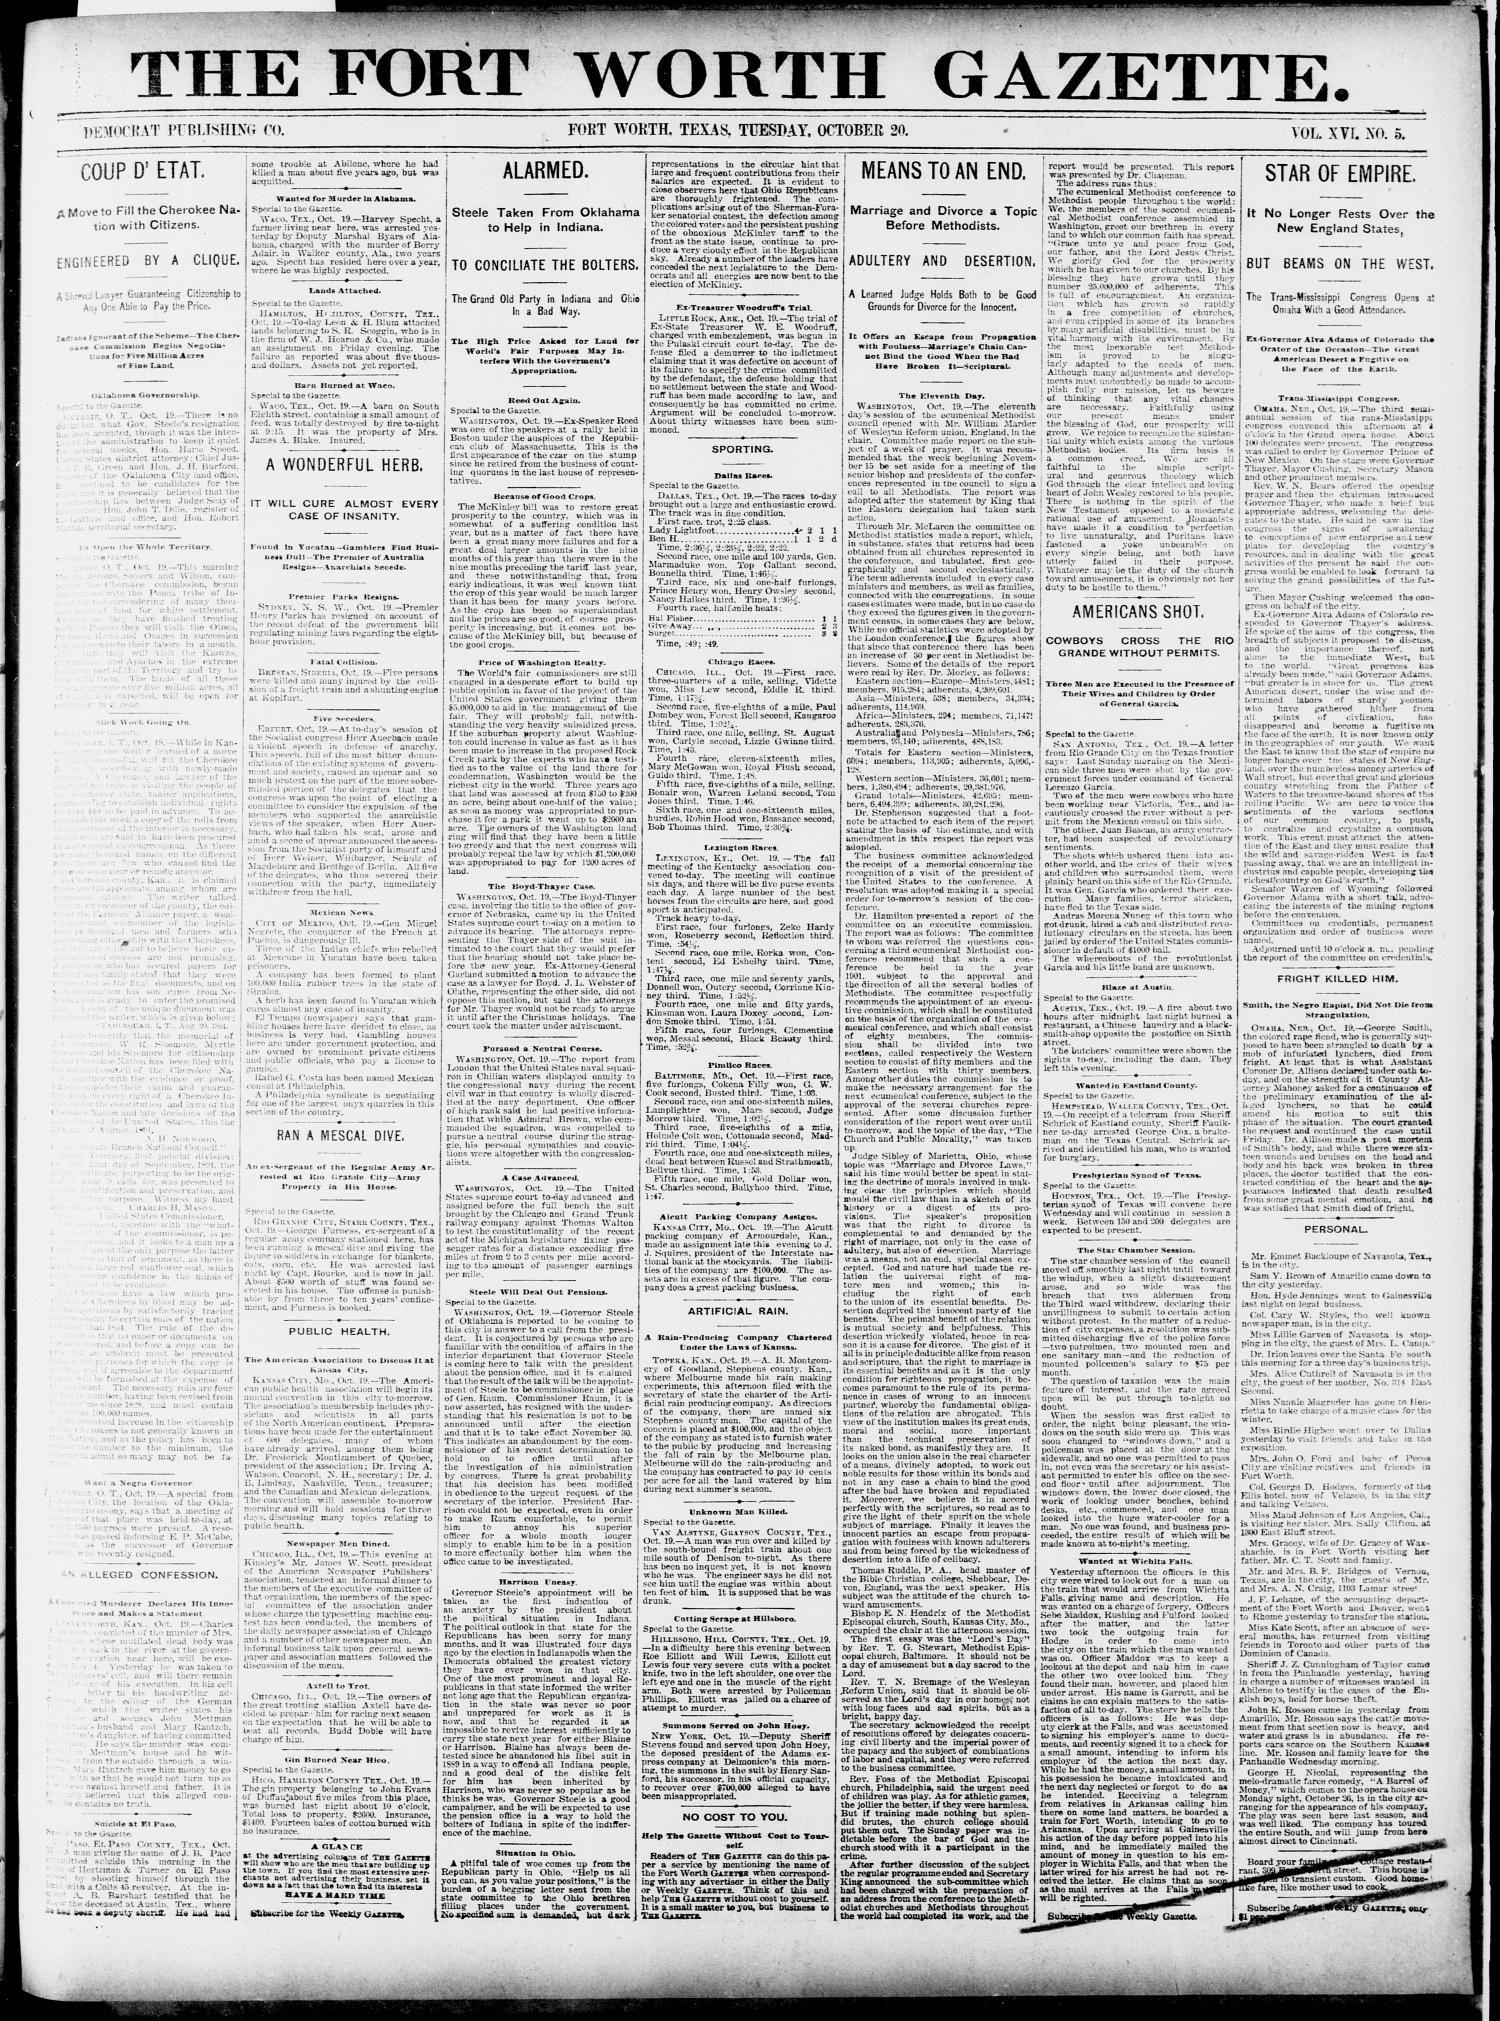 Fort Worth Gazette. (Fort Worth, Tex.), Vol. 16, No. 5, Ed. 1, Tuesday, October 20, 1891
                                                
                                                    [Sequence #]: 1 of 8
                                                